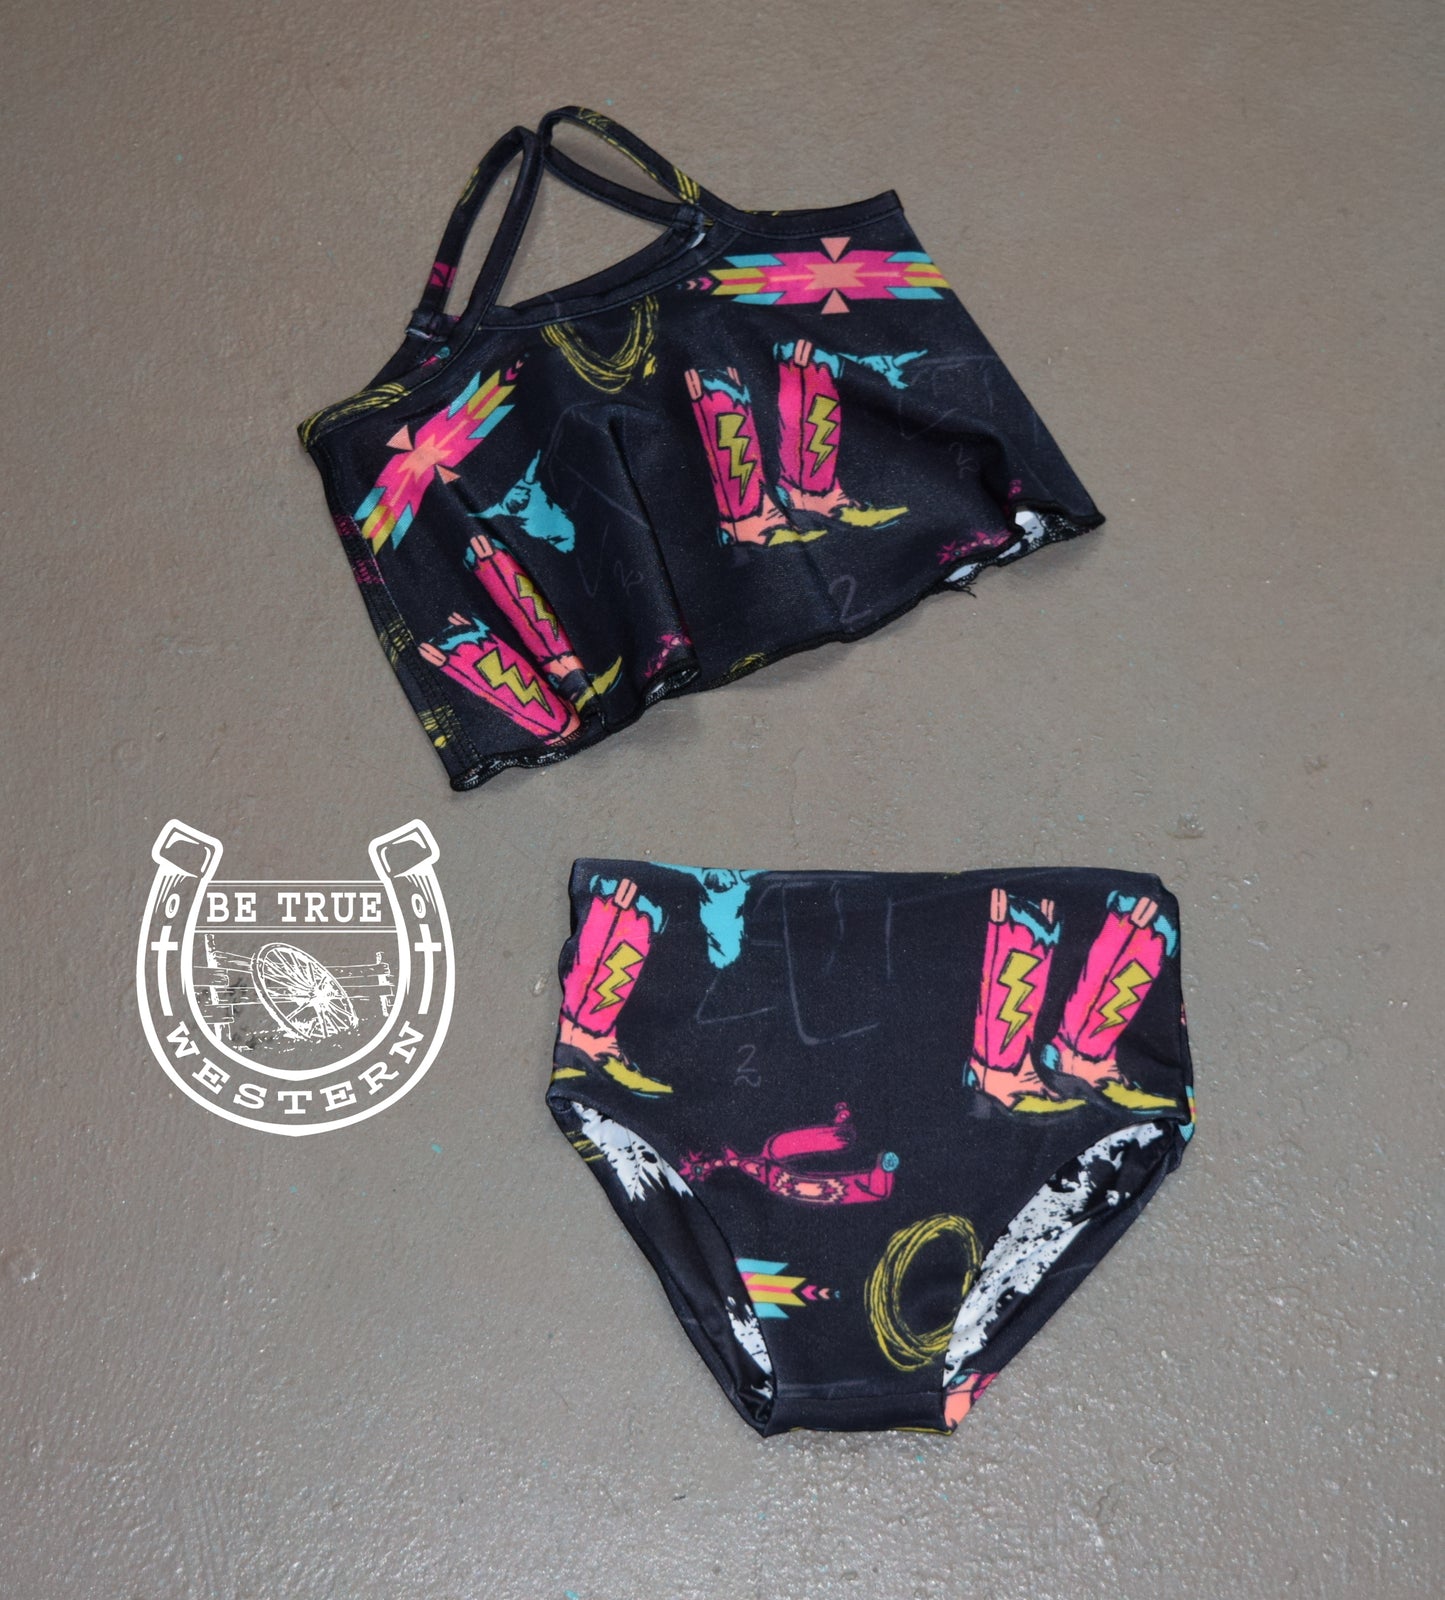 The Rope the Neon Lights Infant/Kids Swim Suit Bottoms